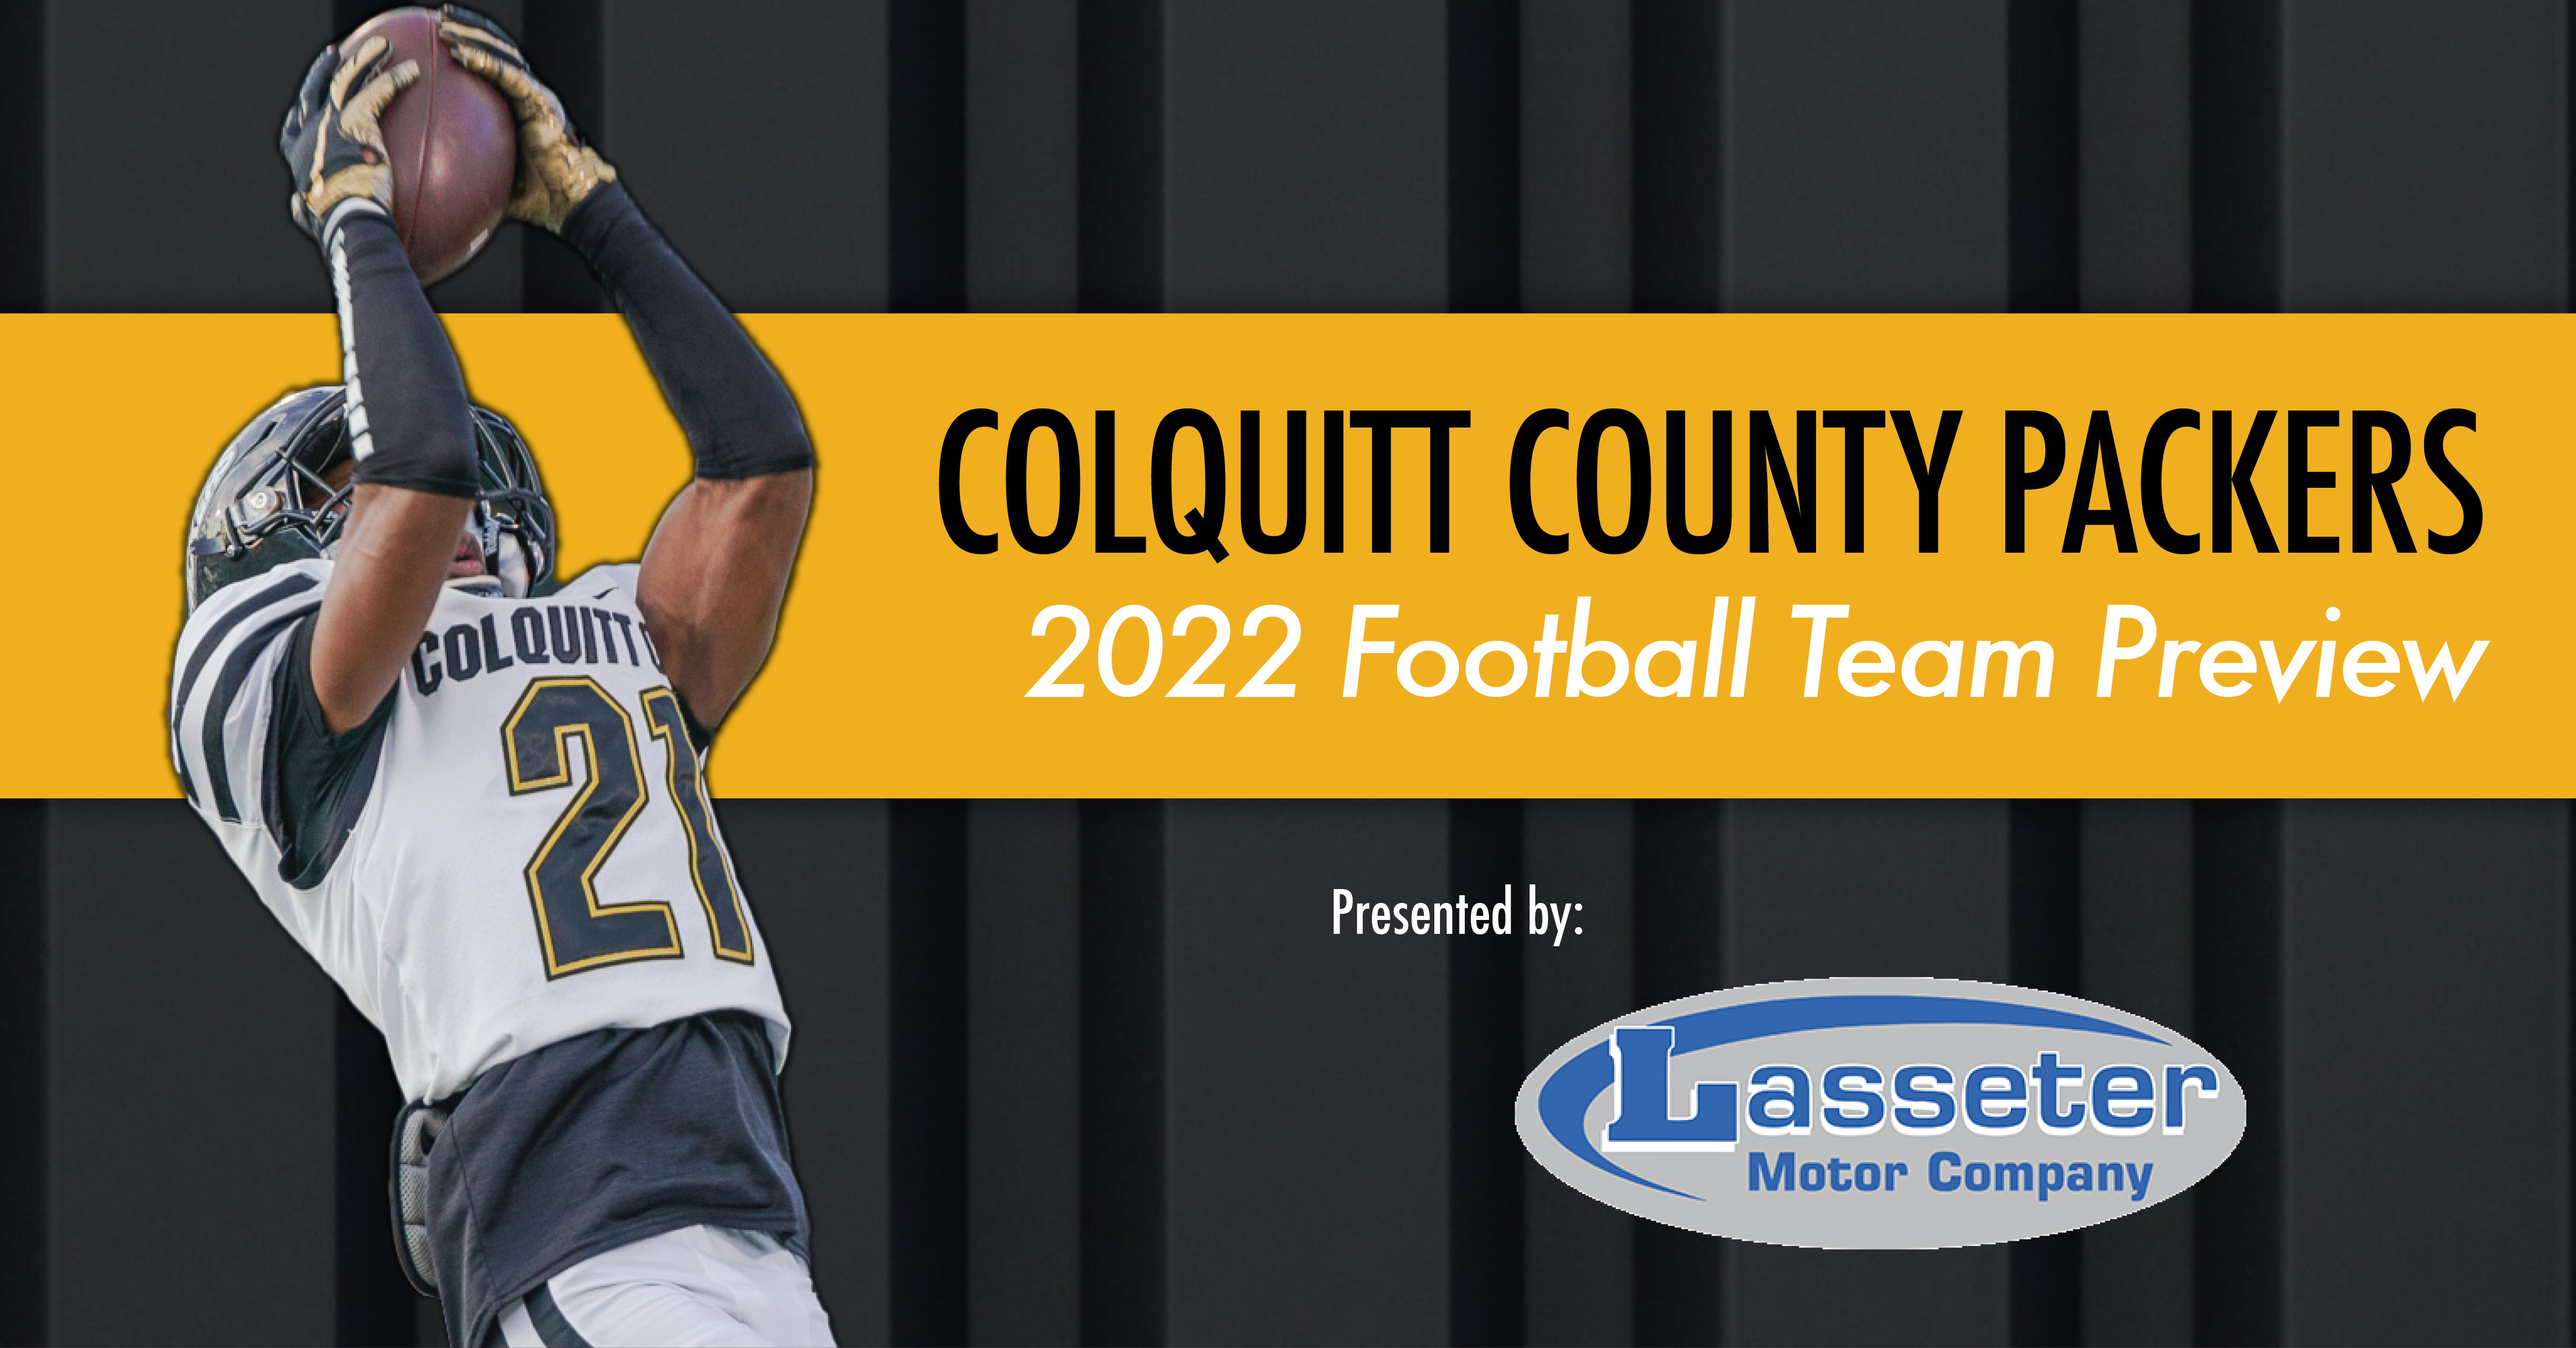 Colquitt County Football 2022 Team Preview - ITG Next